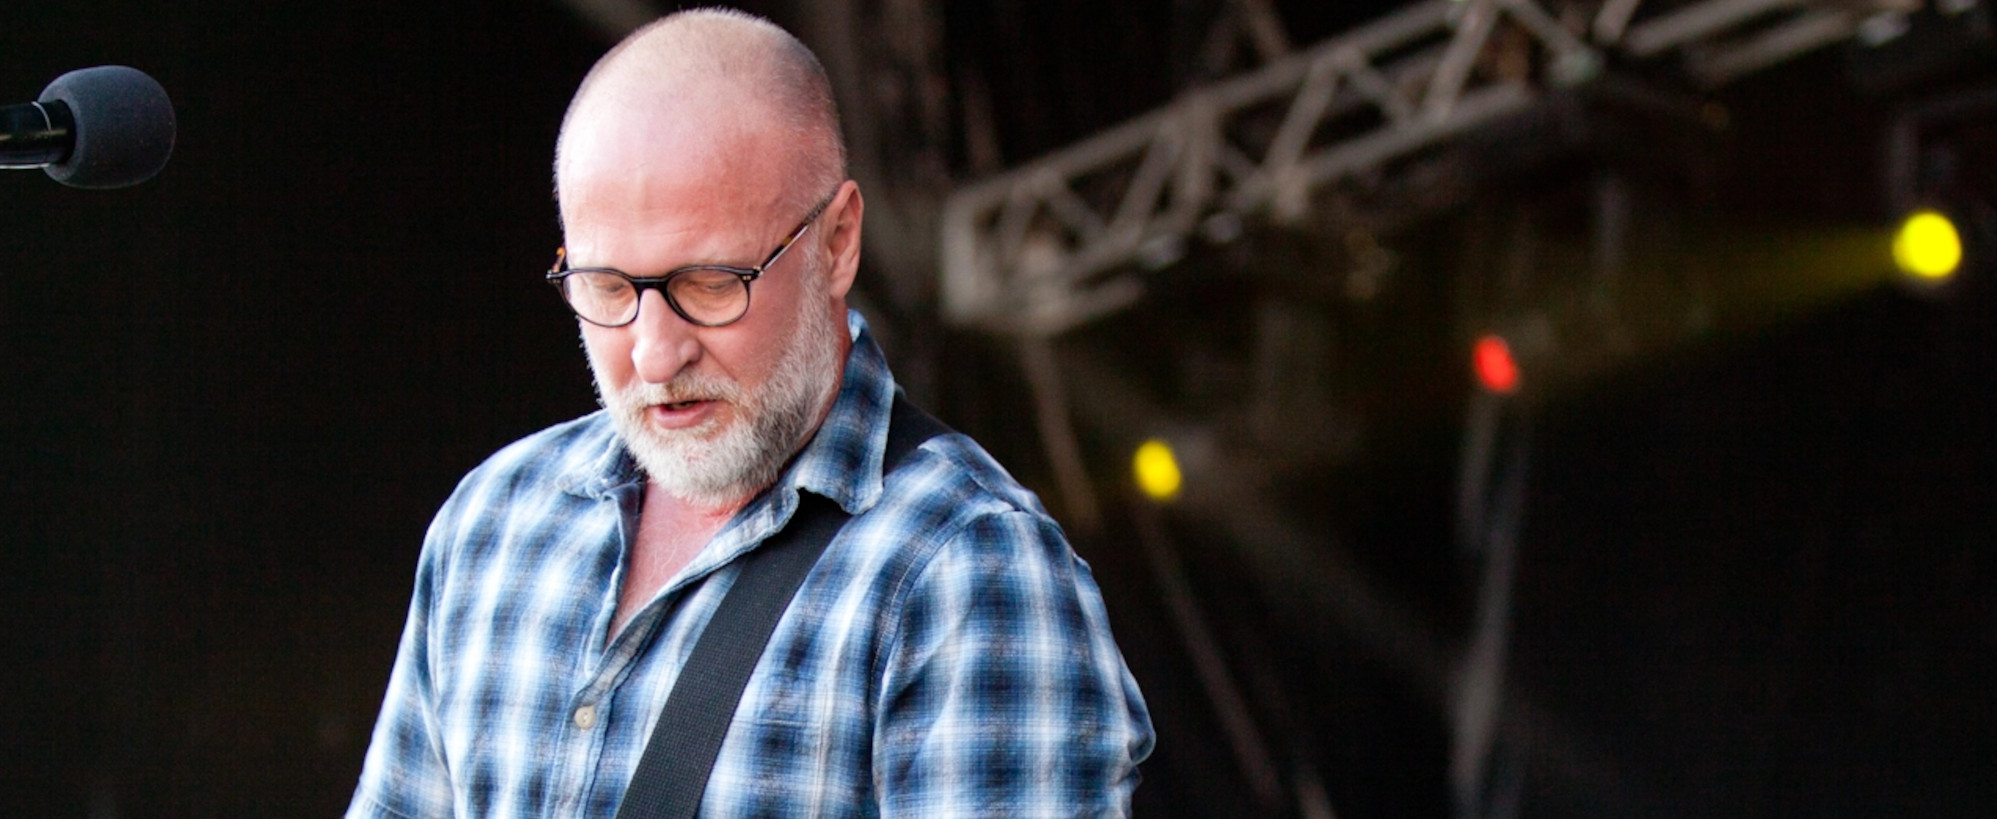 Bob Mould and Fred Armisen Perform Hüsker Dü hit, “I Apologize,” Ahead of Hardly Strictly Bluegrass Festival